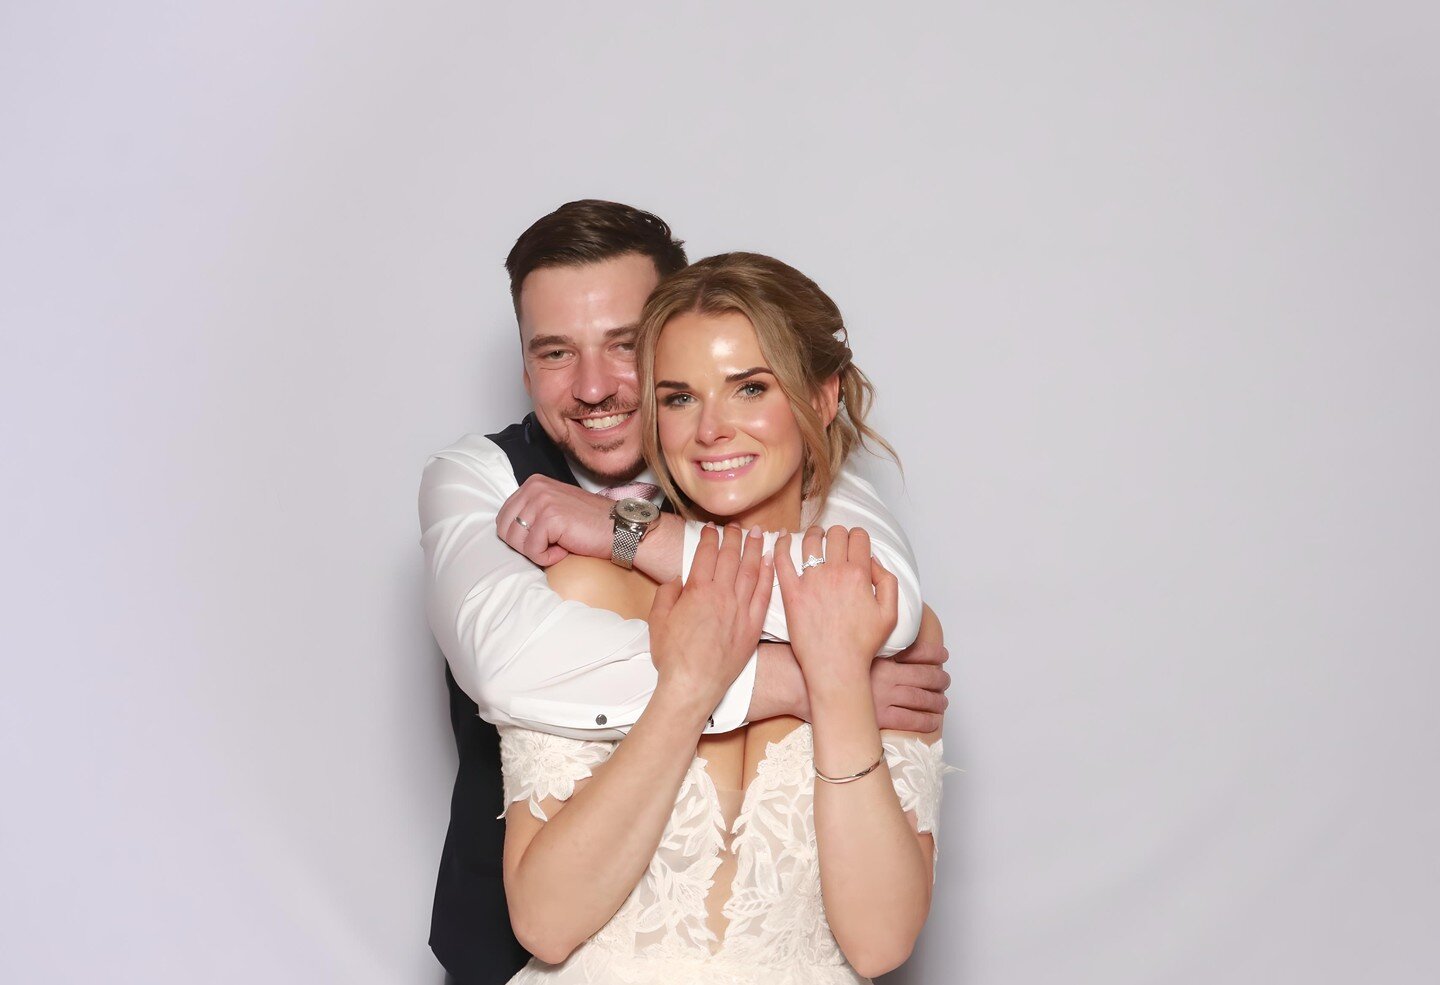 📸✨ Holly and Ryan's Photo Booth Gallery is now LIVE! 💖

Link in bio to view and relive the magic! 🌟 ✨🥳